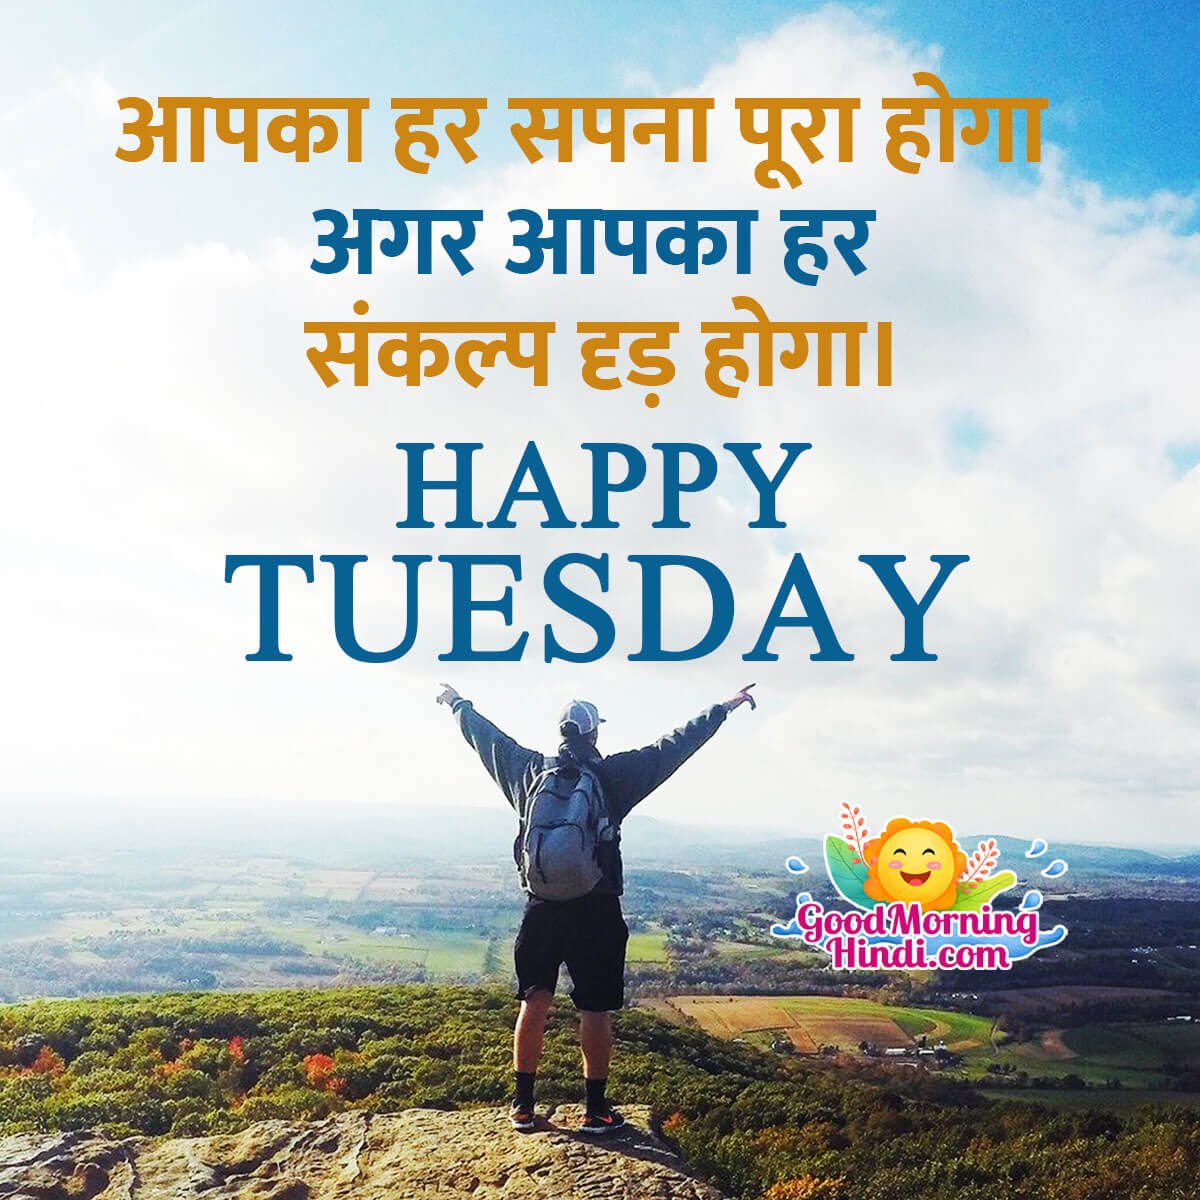 Happy Tuesday Messages In Hindi